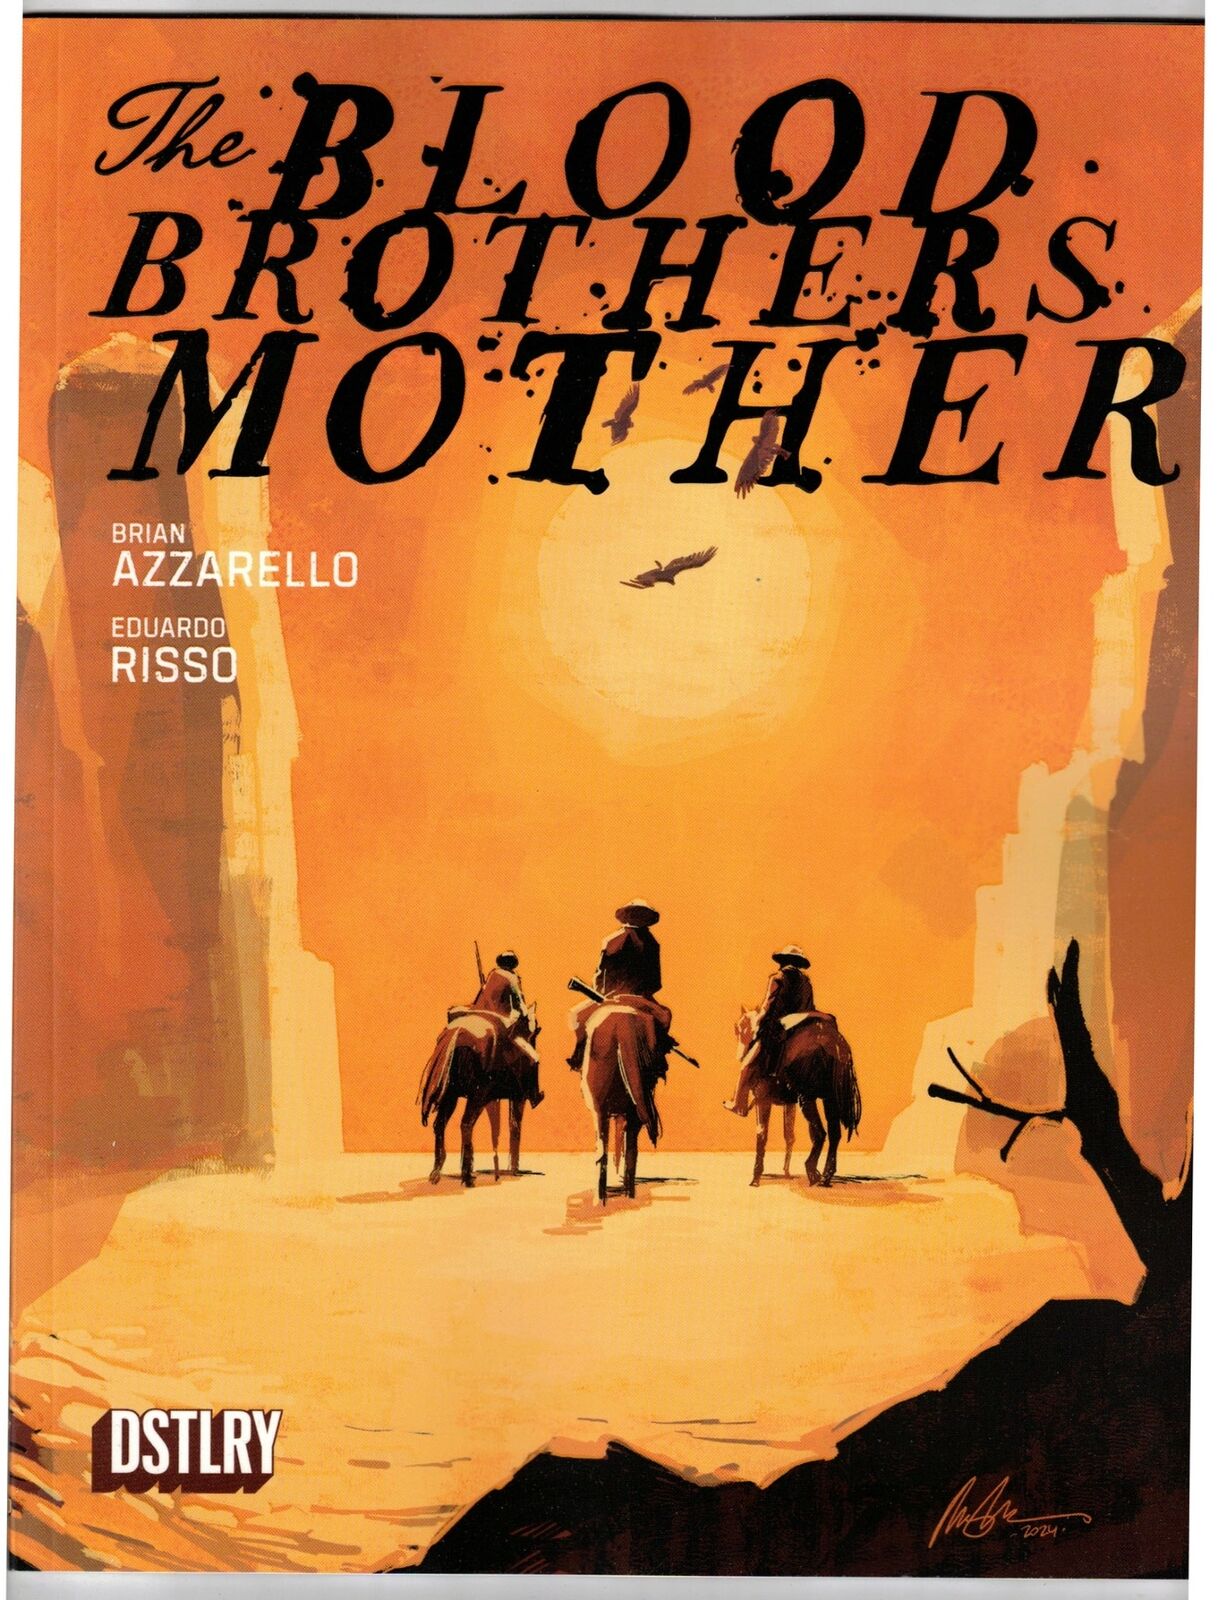 THE BLOOD BROTHERS MOTHER #1-1:10 RAFAEL ALBUQUERQUE VARIANT-AZZARELLO- DSTLRY